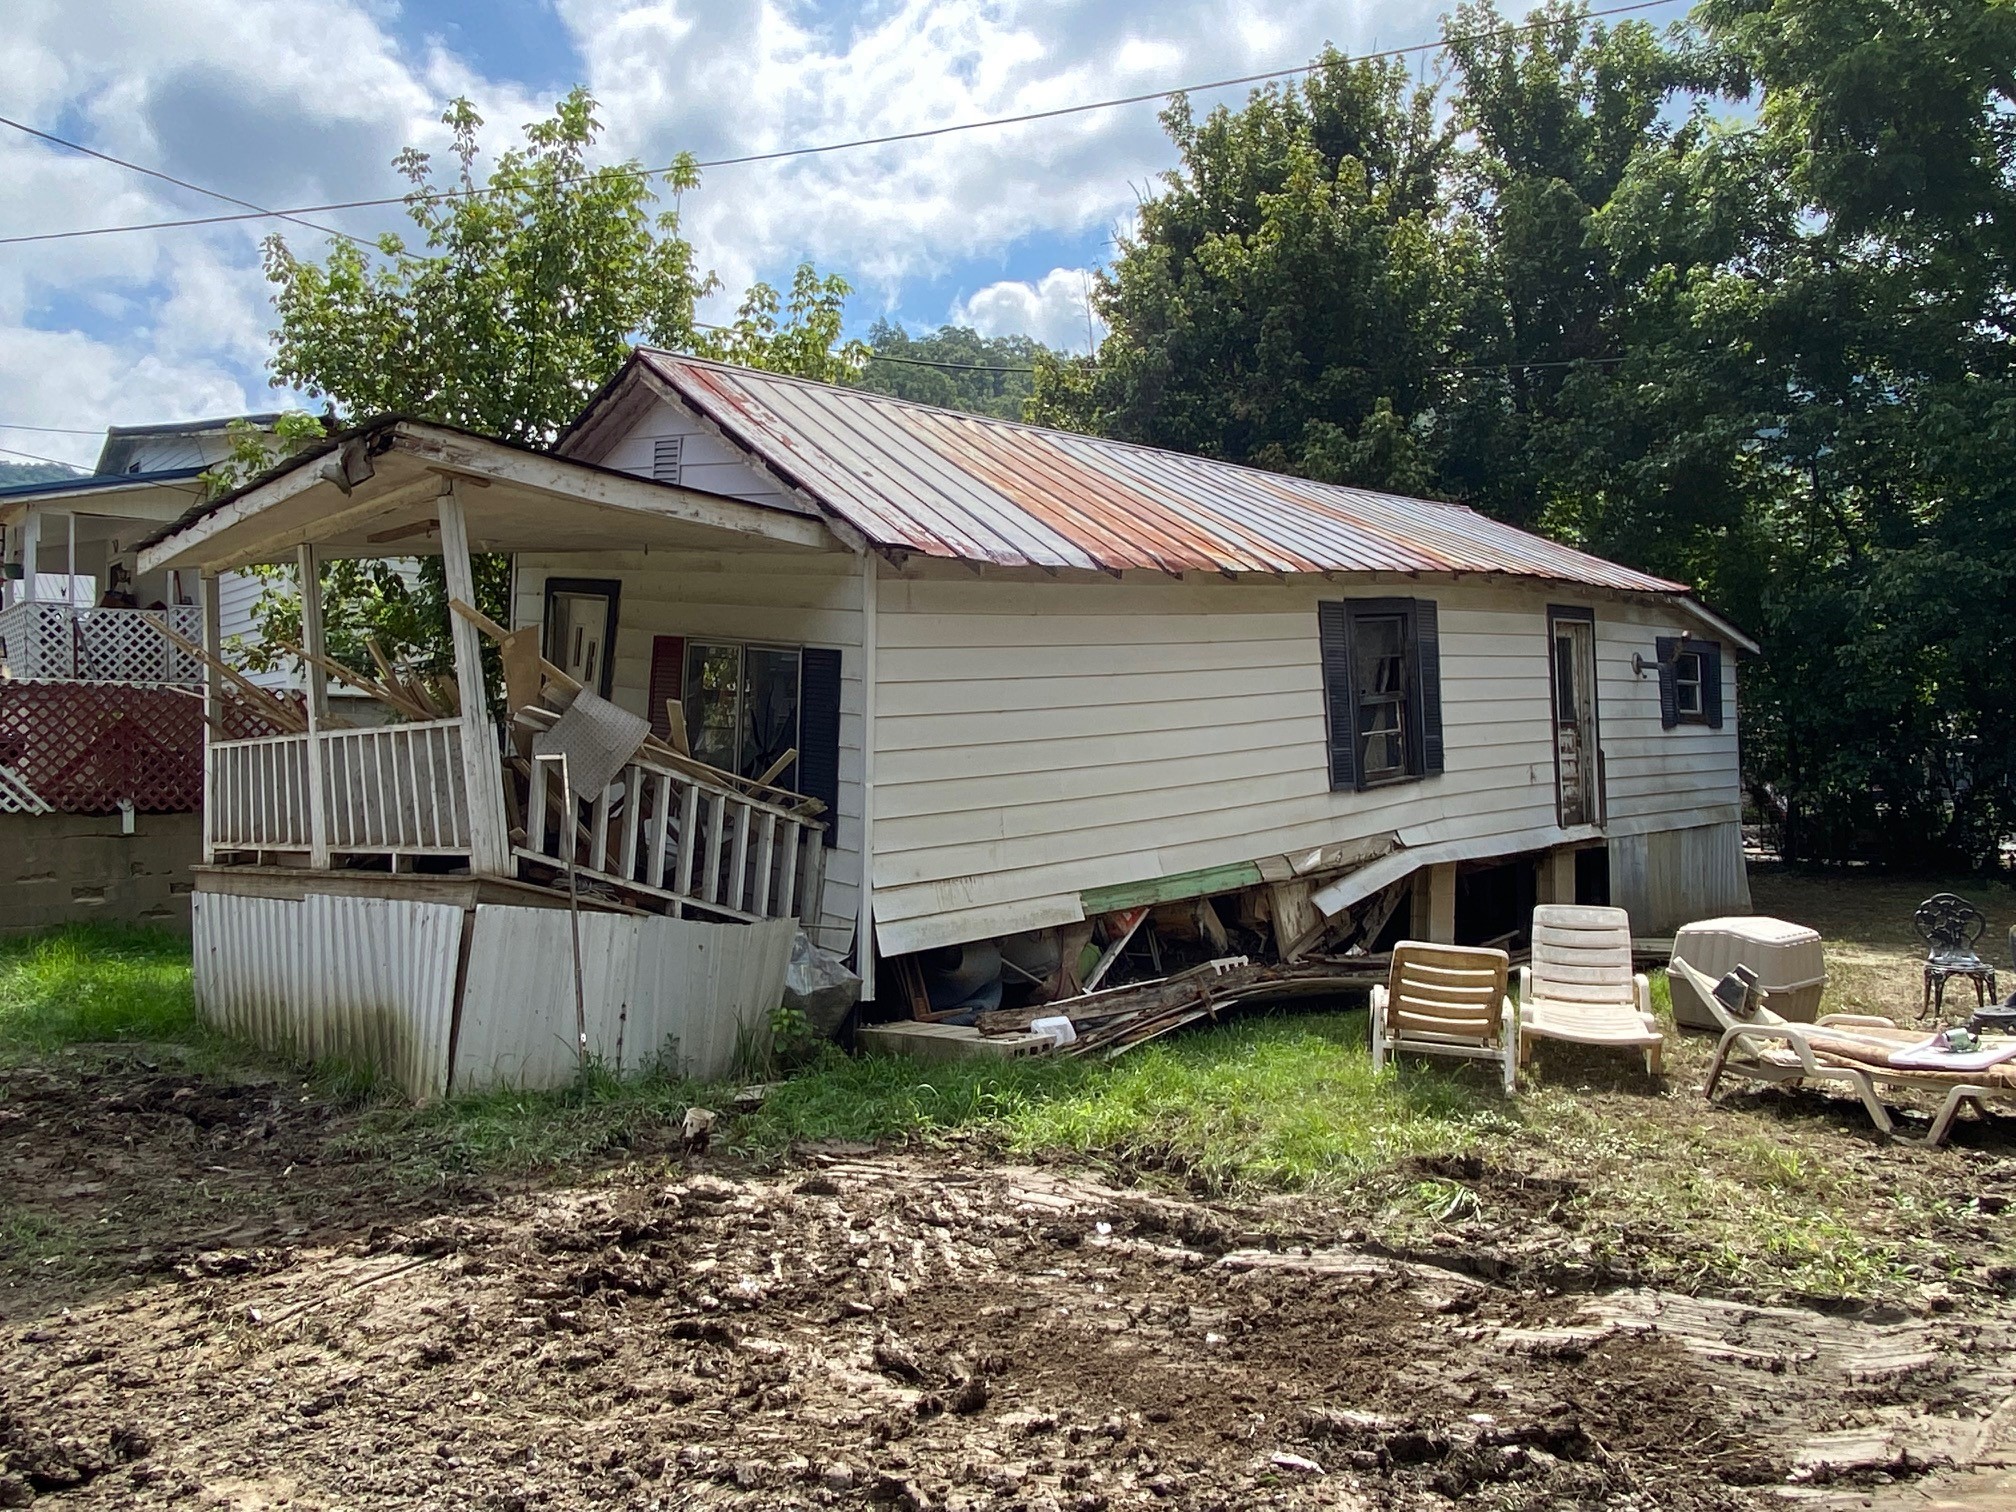 Home destroyed by Kentucky floods